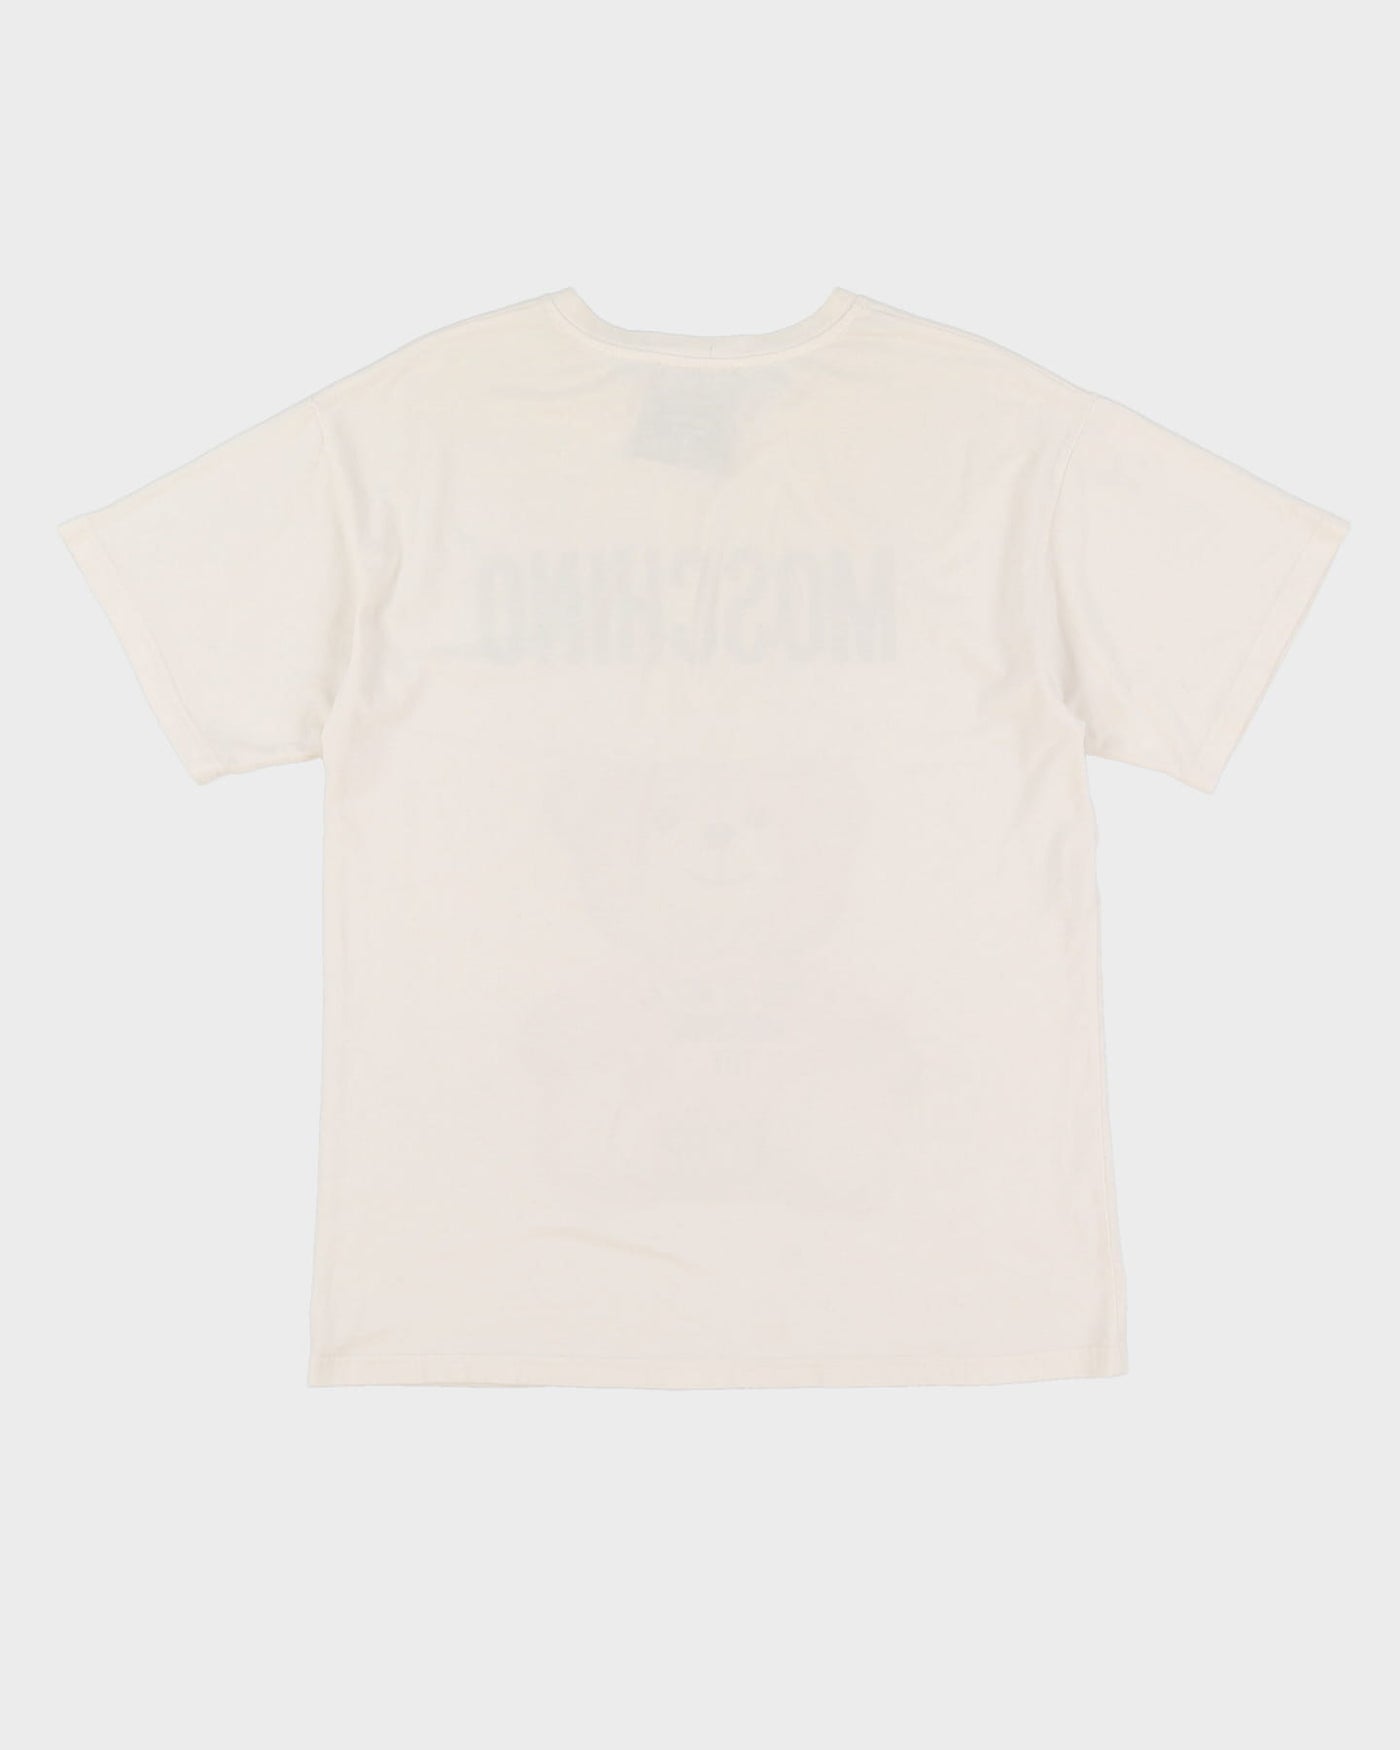 00s Y2K Moschino This Is Not A Moschino Toy Bear White T-Shirt - M